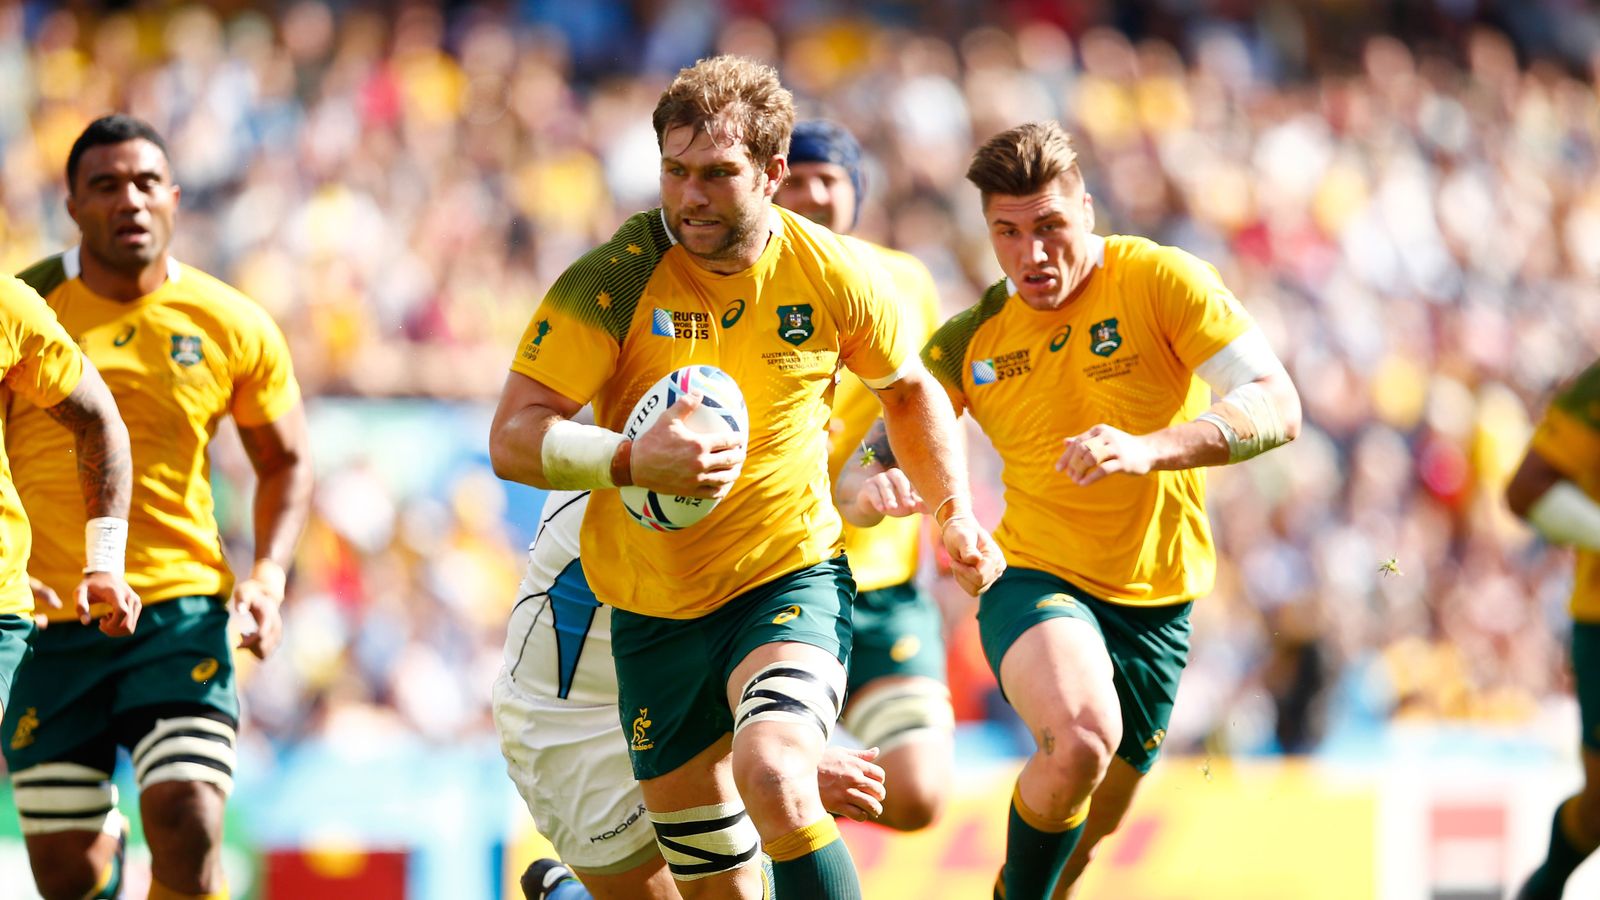 Australia beat Uruguay 65-3 to cruise to the top of Rugby World Cup